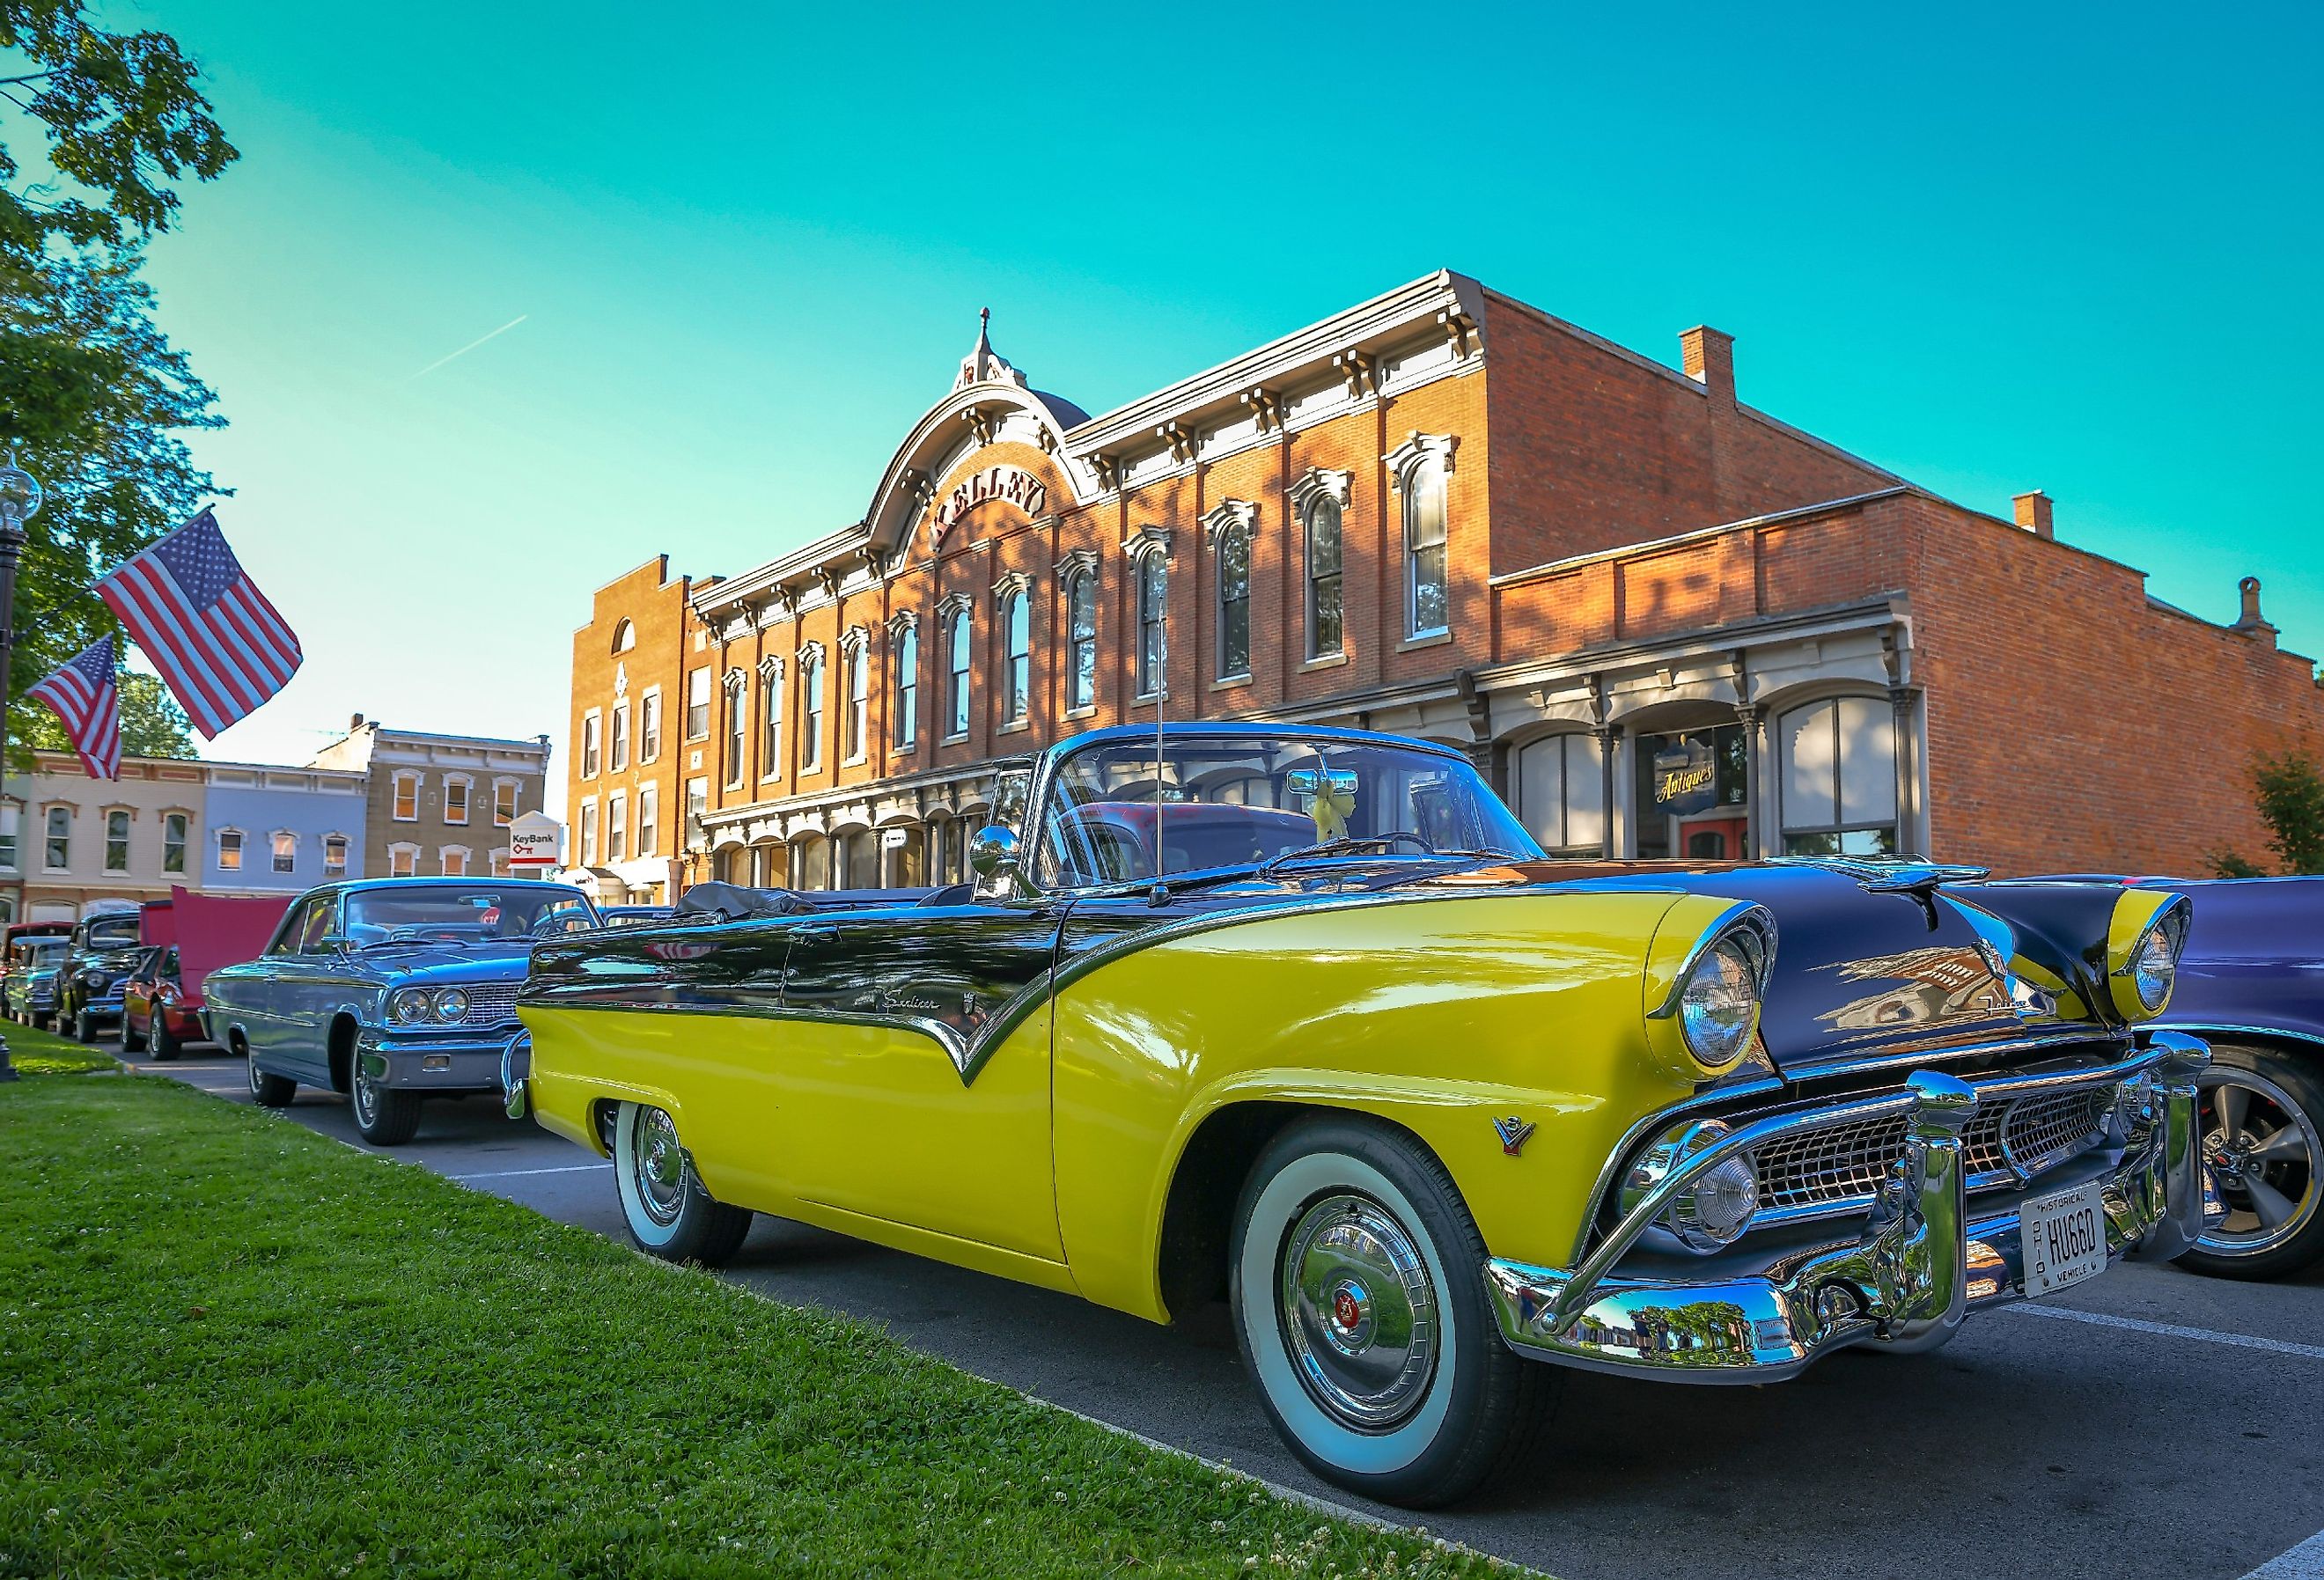 Classic Cars meet on the town square in Milan, Ohio. Image credit Keith J Finks via Shutterstock.com